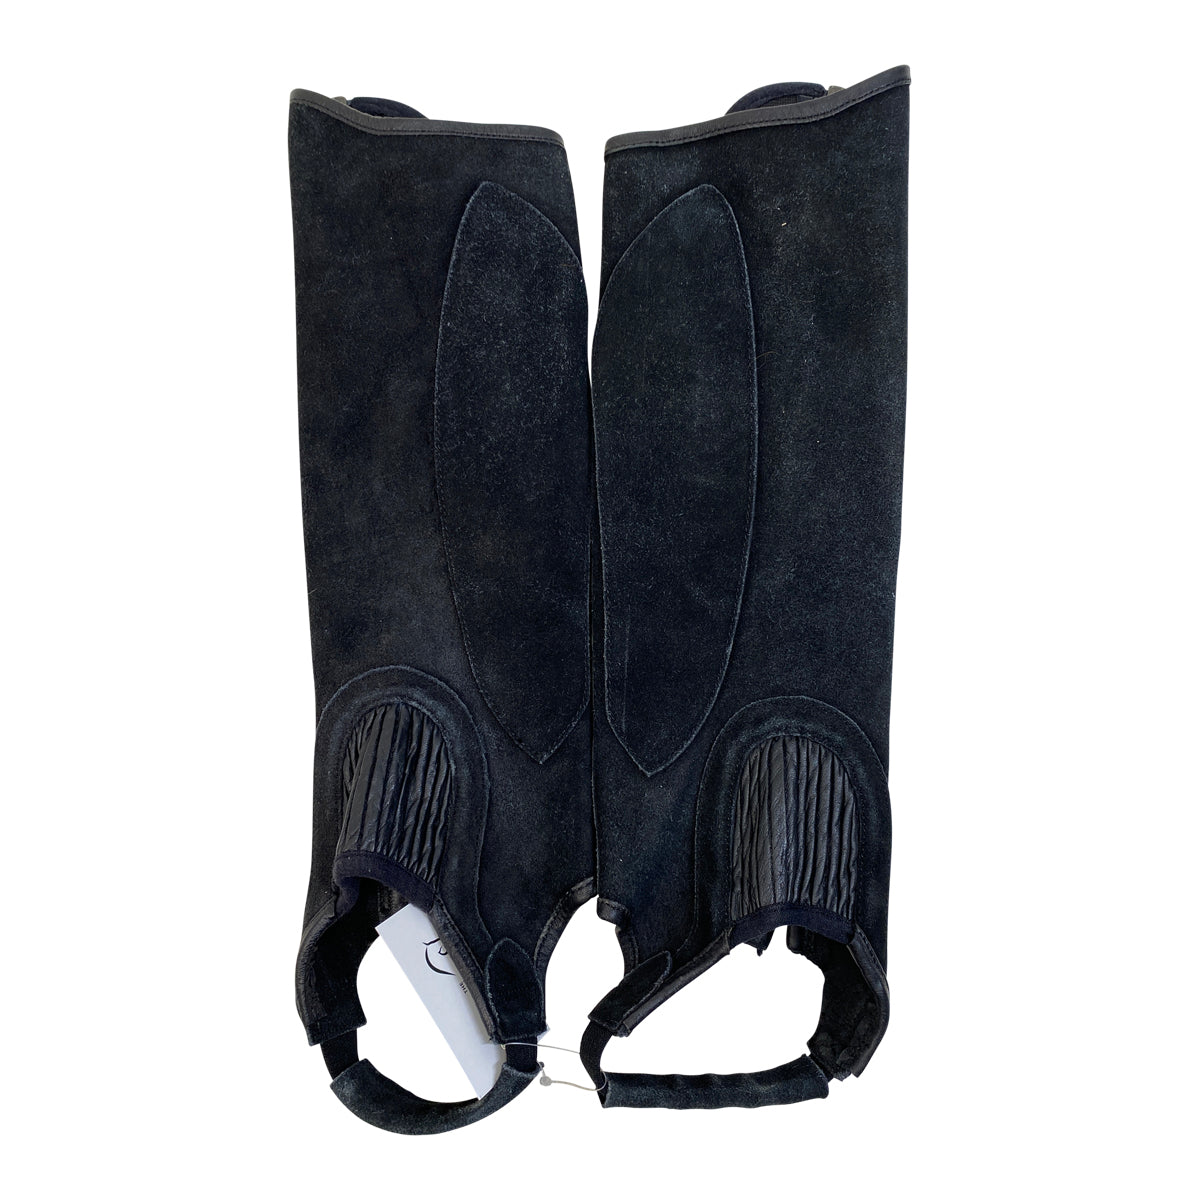 Ovation Suede Ribbed Half Chaps in Black